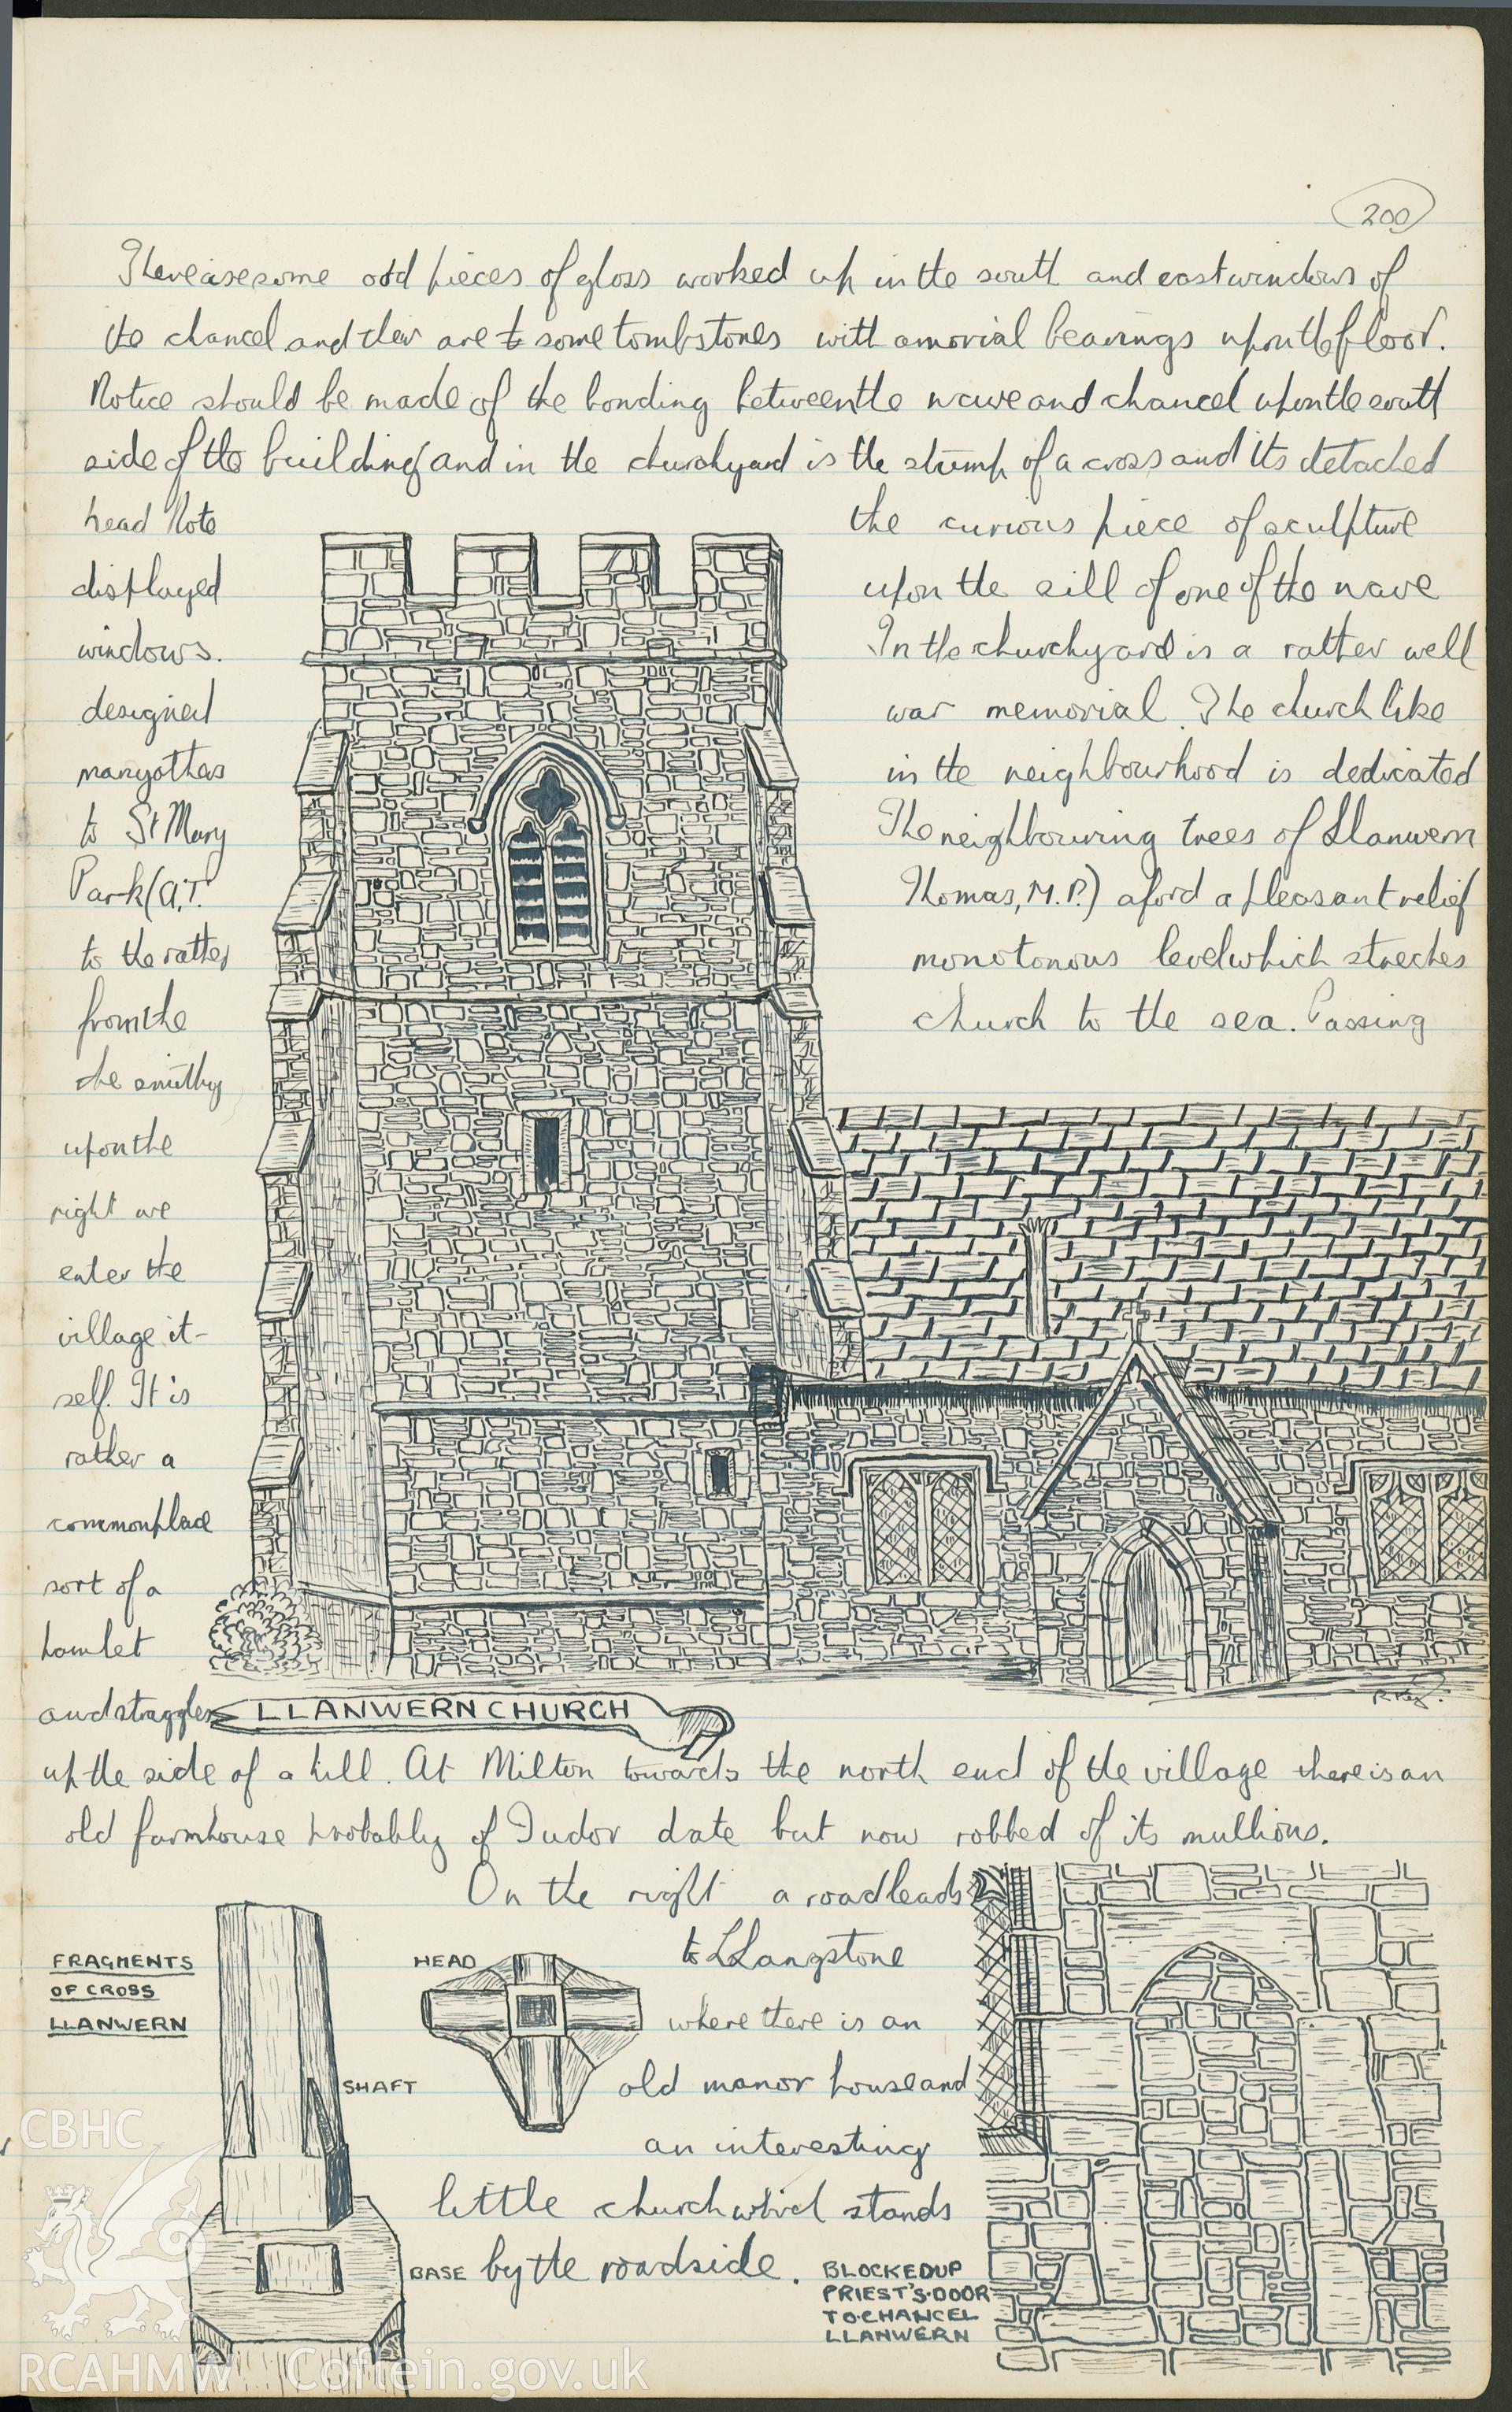 Page from a notebook featuring an illustration by R.E. Kay showing Llanwern Church. As featured on p200 of R.E. Kay Notebook Series I, Vol II.